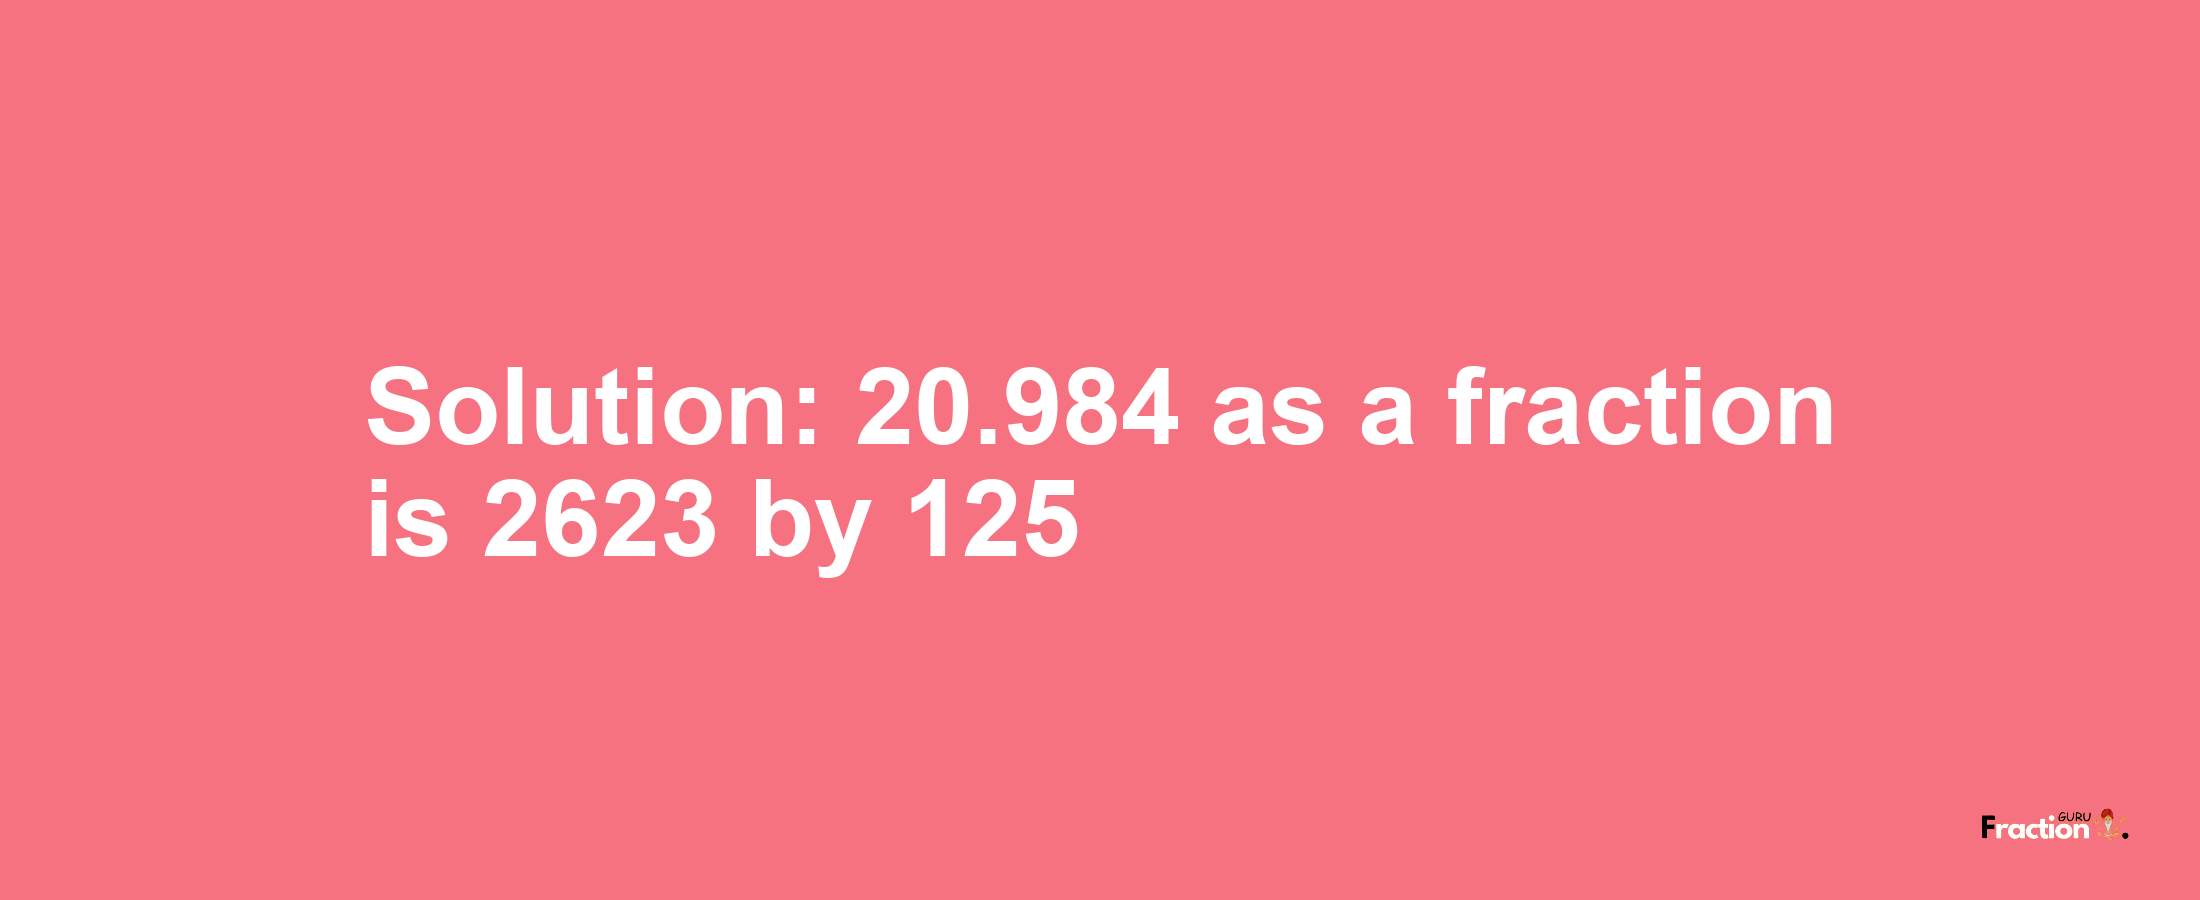 Solution:20.984 as a fraction is 2623/125